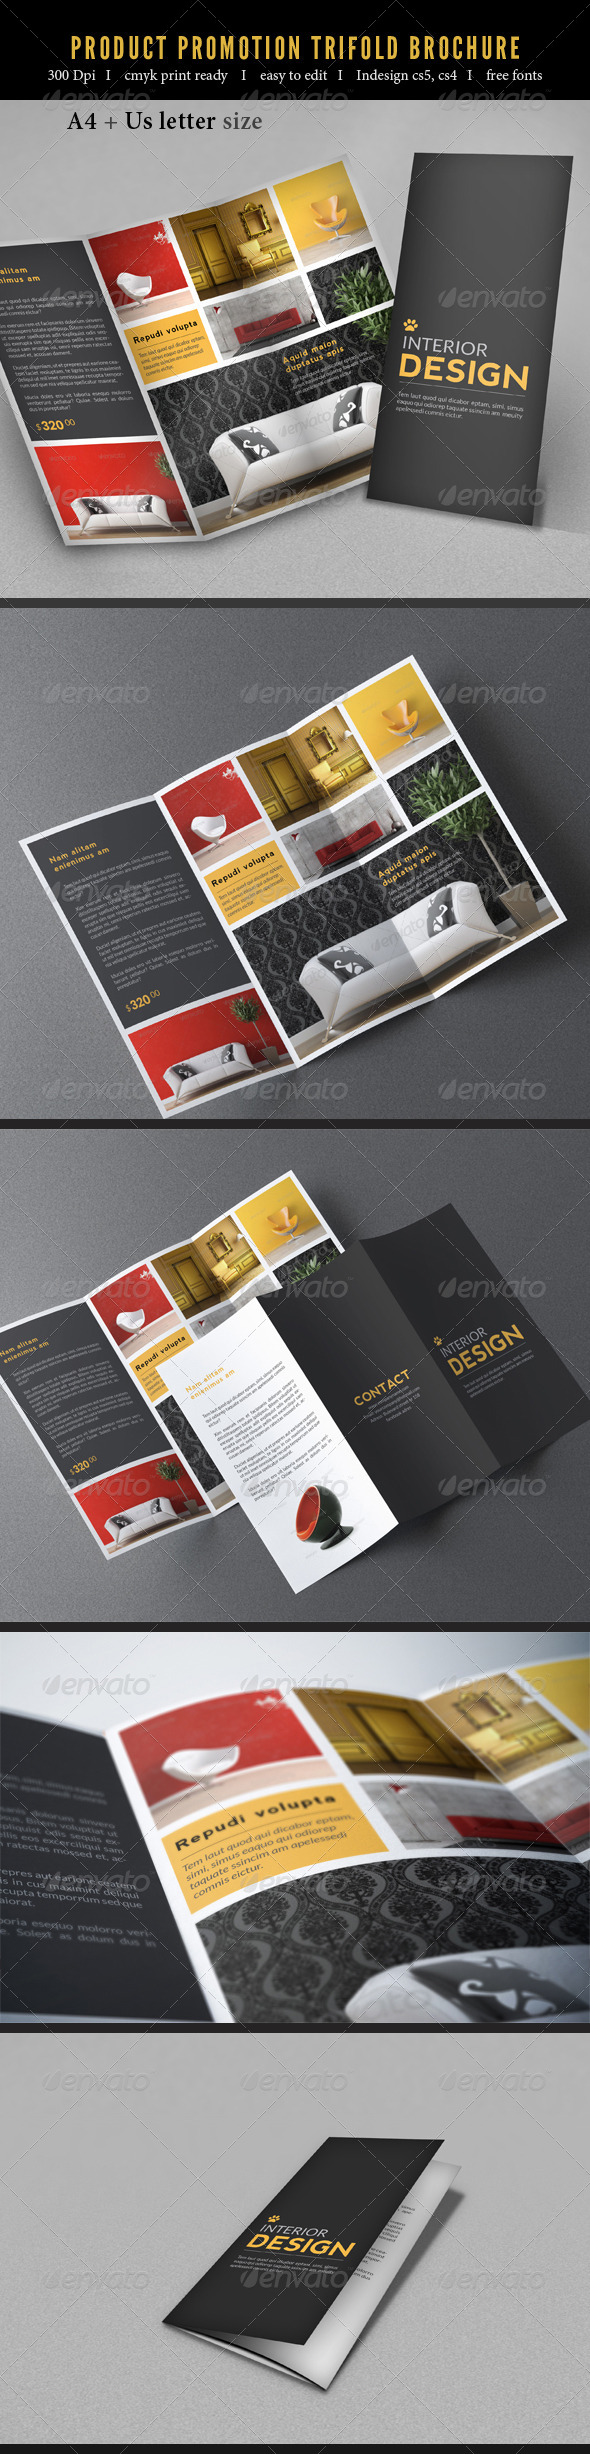 GraphicRiver Product Promotion Trifold Brochure 7665757